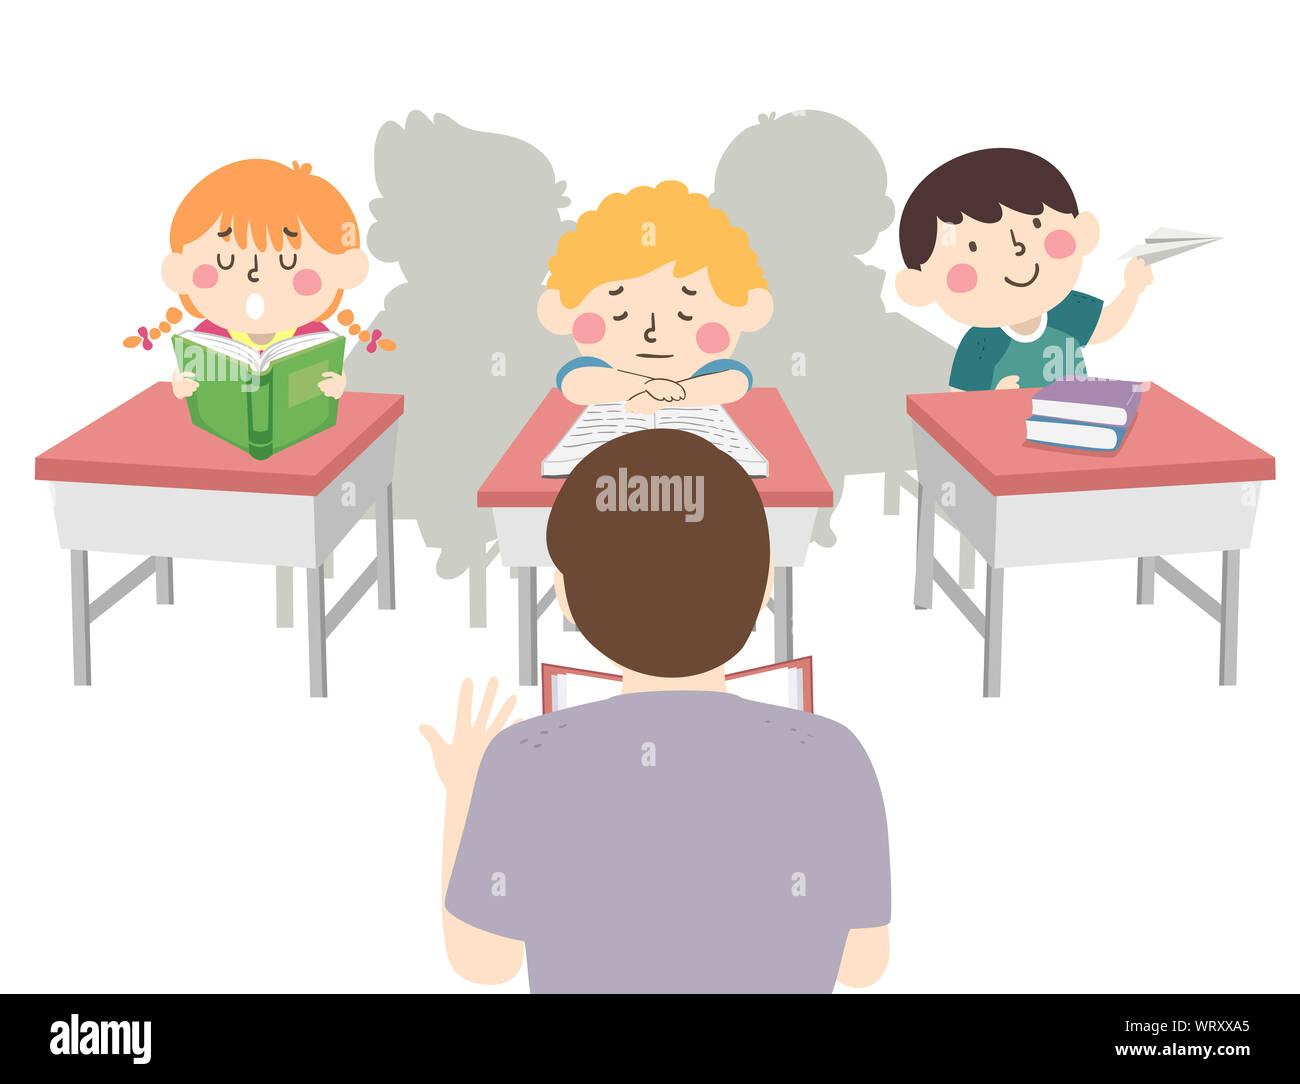 Illustration Of Kids In Classroom Sitting On Their Desks And Not